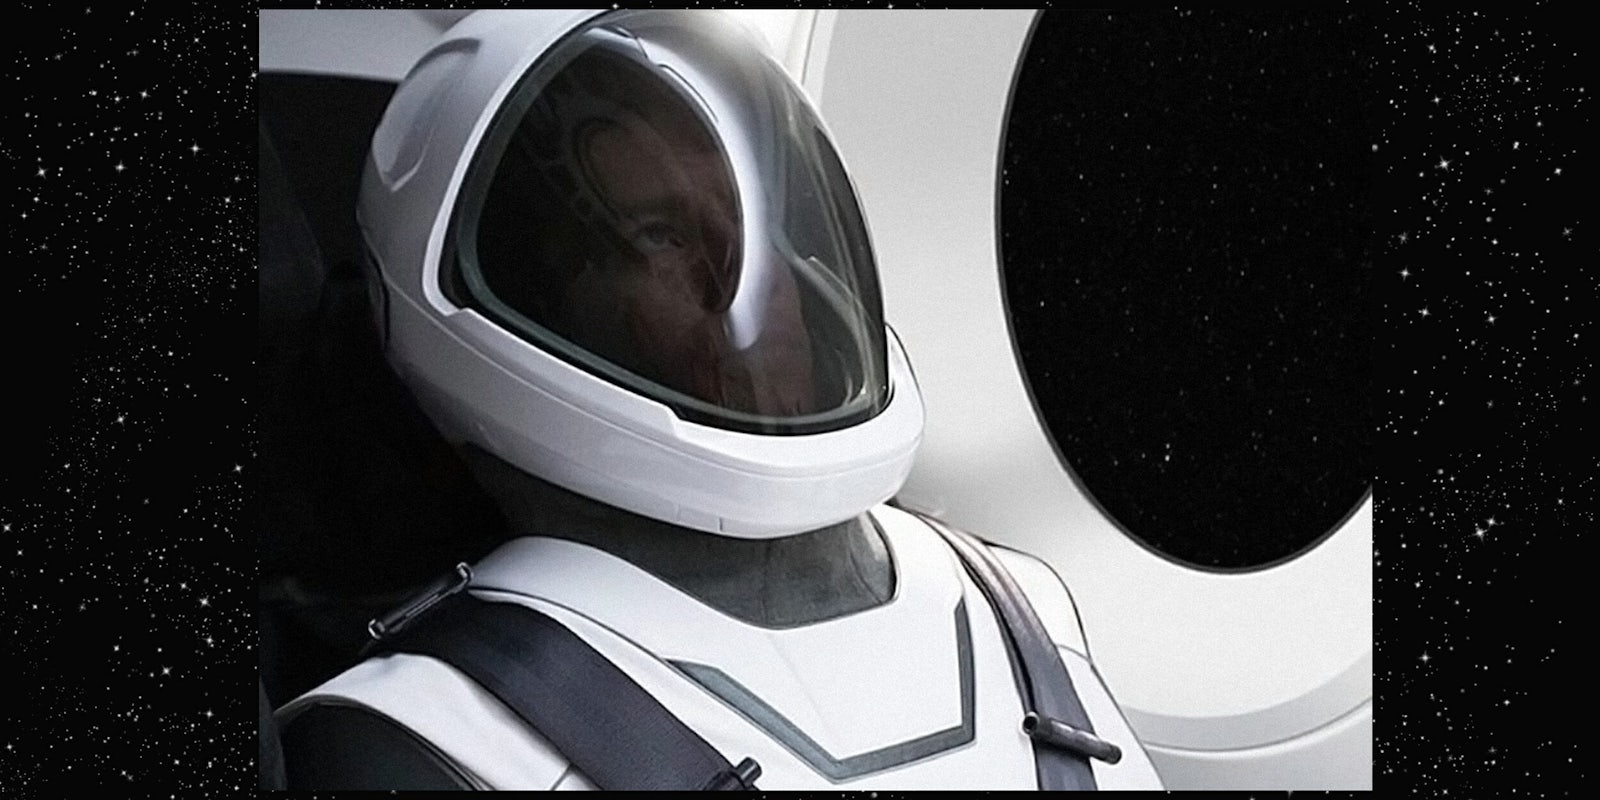 New SpaceX spacesuit